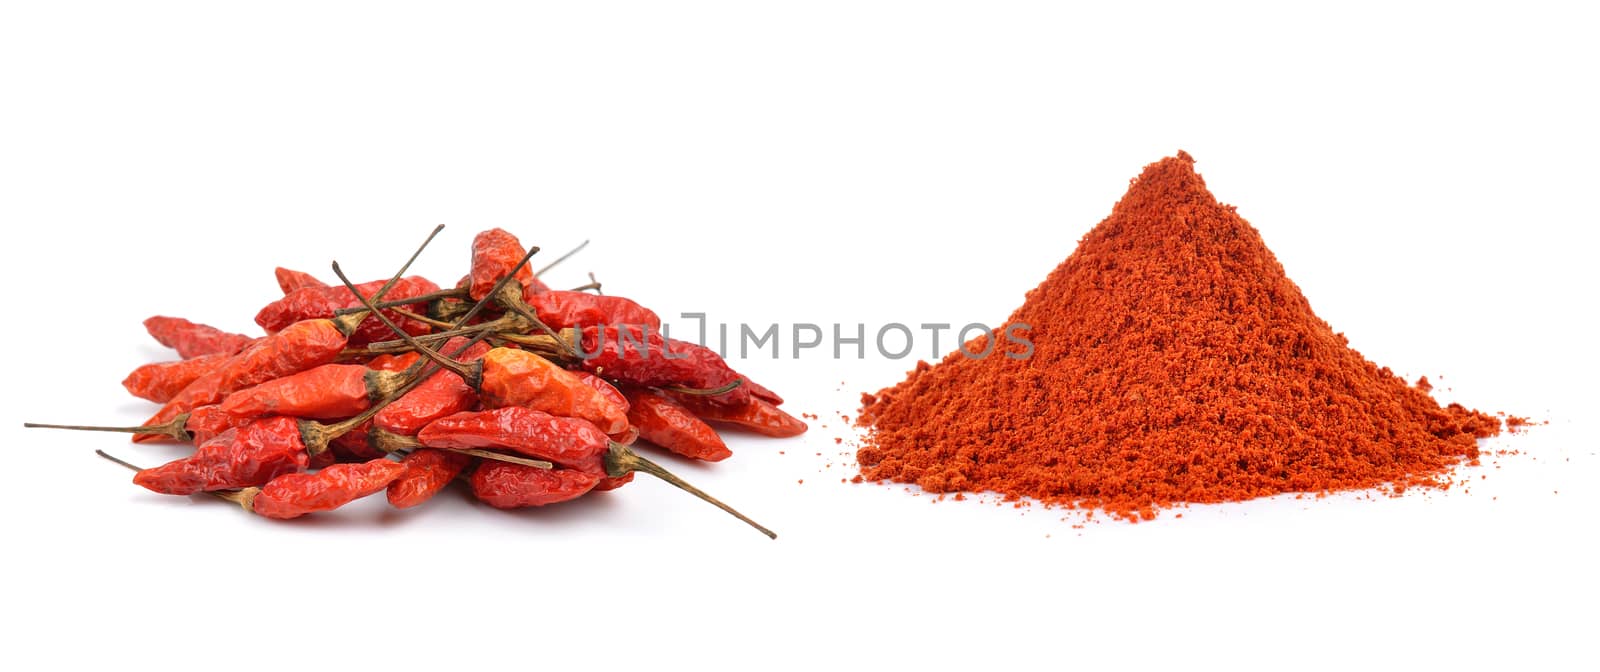 Powdered dried red pepper on white background by sommai